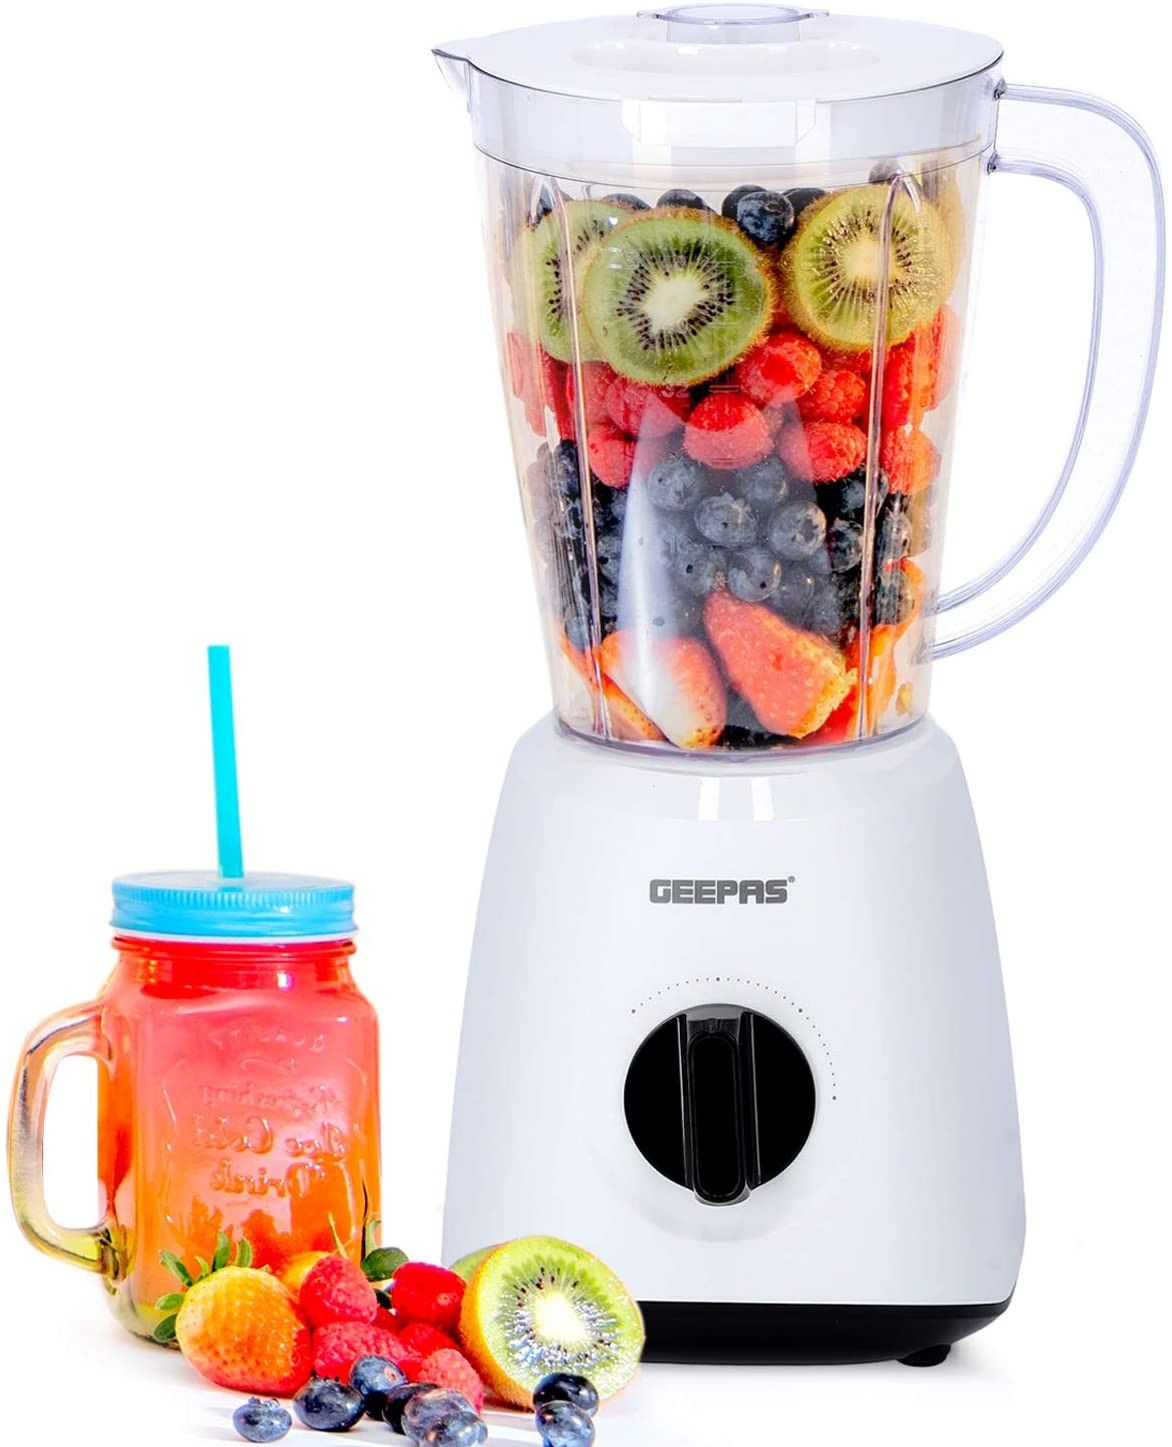 Geepas 1200W Compact Food Processor and Blender, Stainless Steel